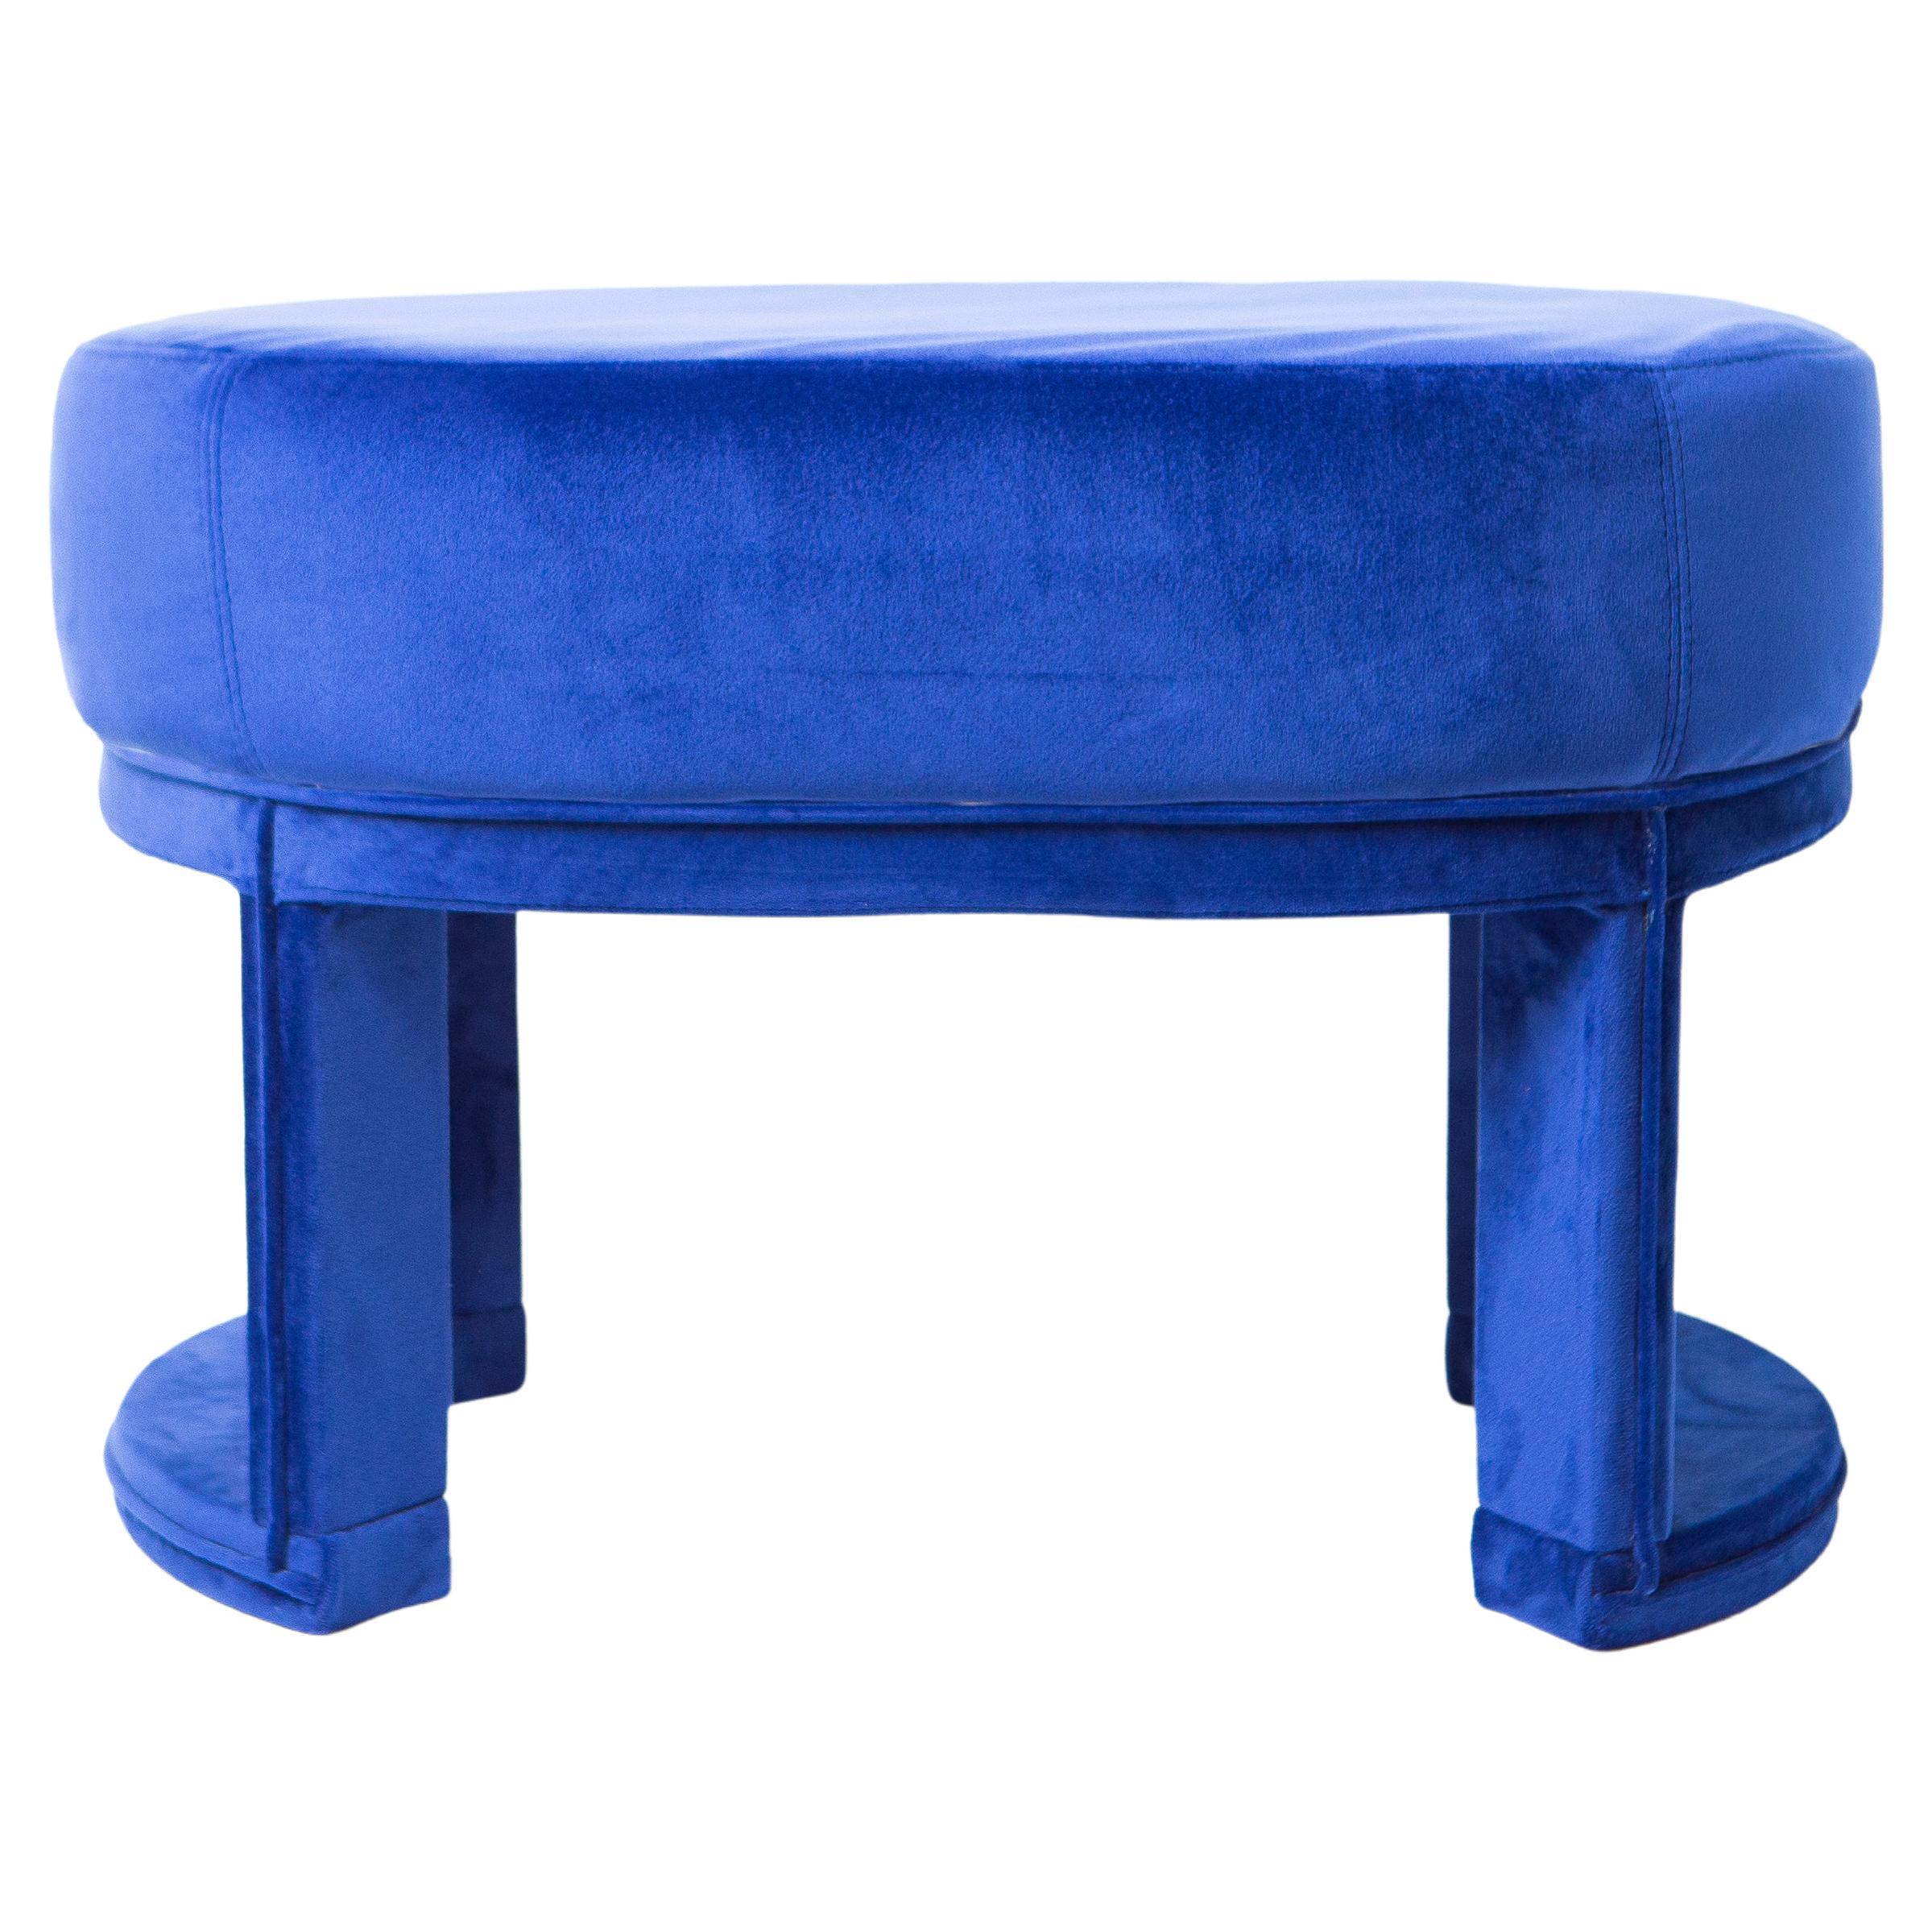 Upholstered Stool For Sale